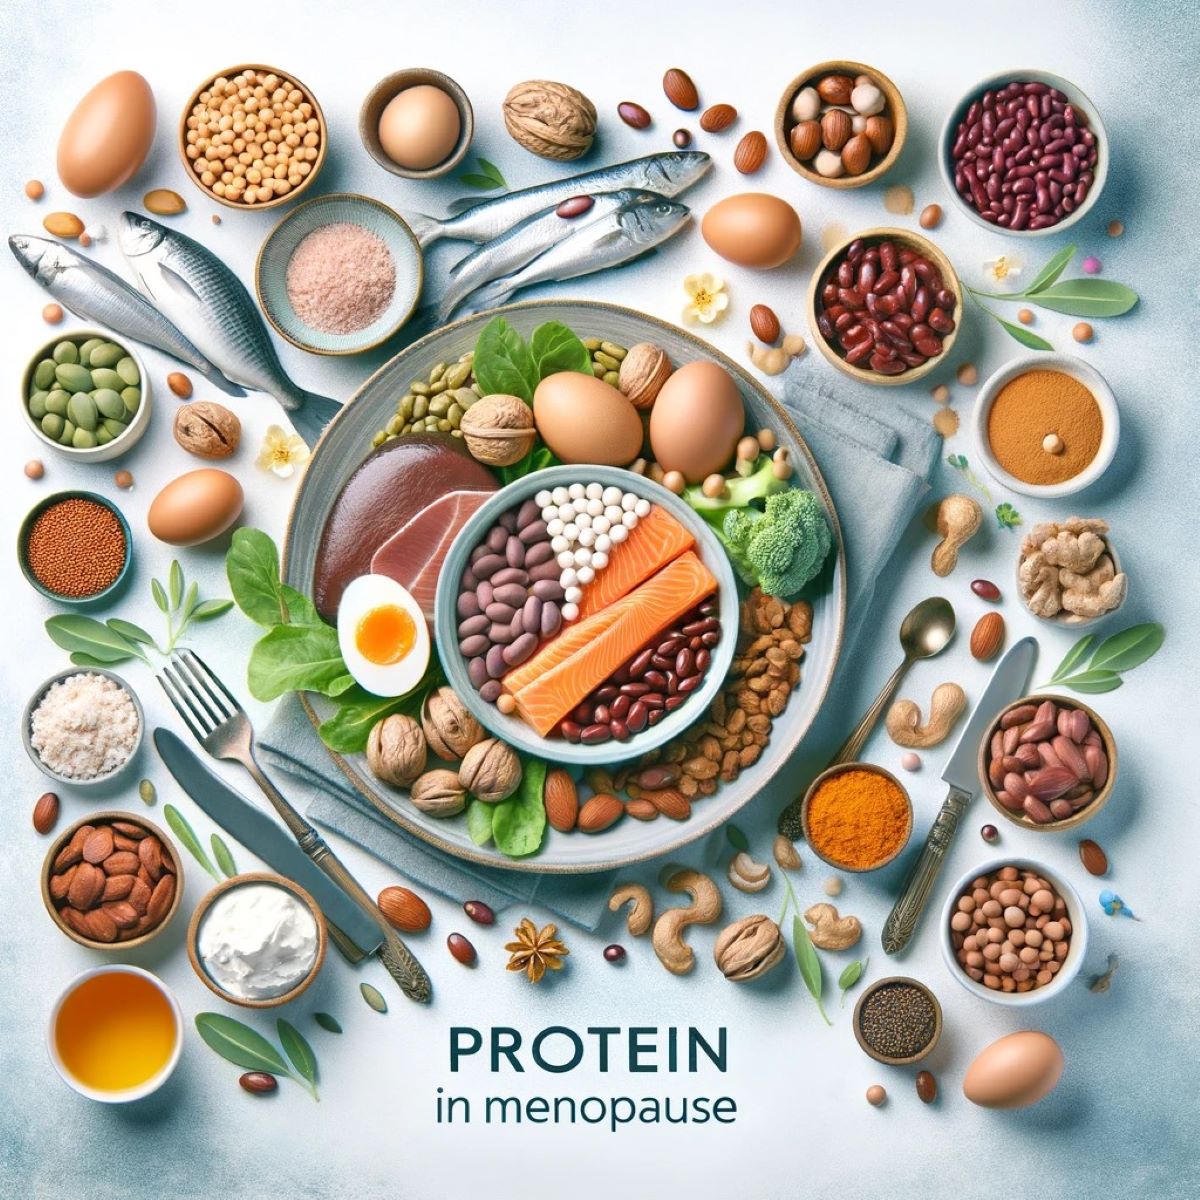 A balanced plate surrounded by foods with a focus on protein-rich foods for menopause.